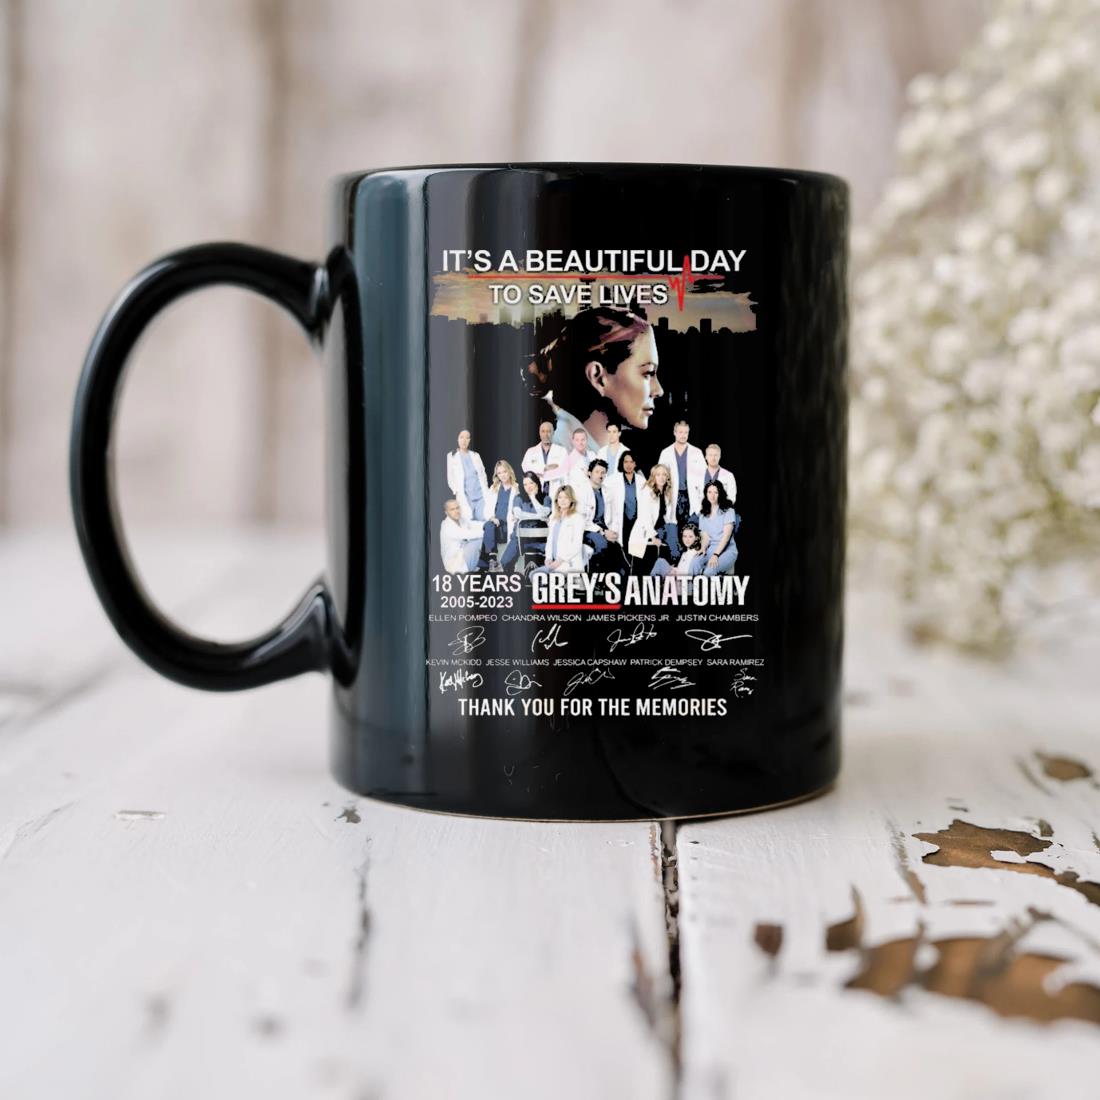 It’s A Beautiful Day To Save Lives 18 Years Of 2005 – 2023 Grey’s Anatomy Thank You For The Memories Signatures Mug